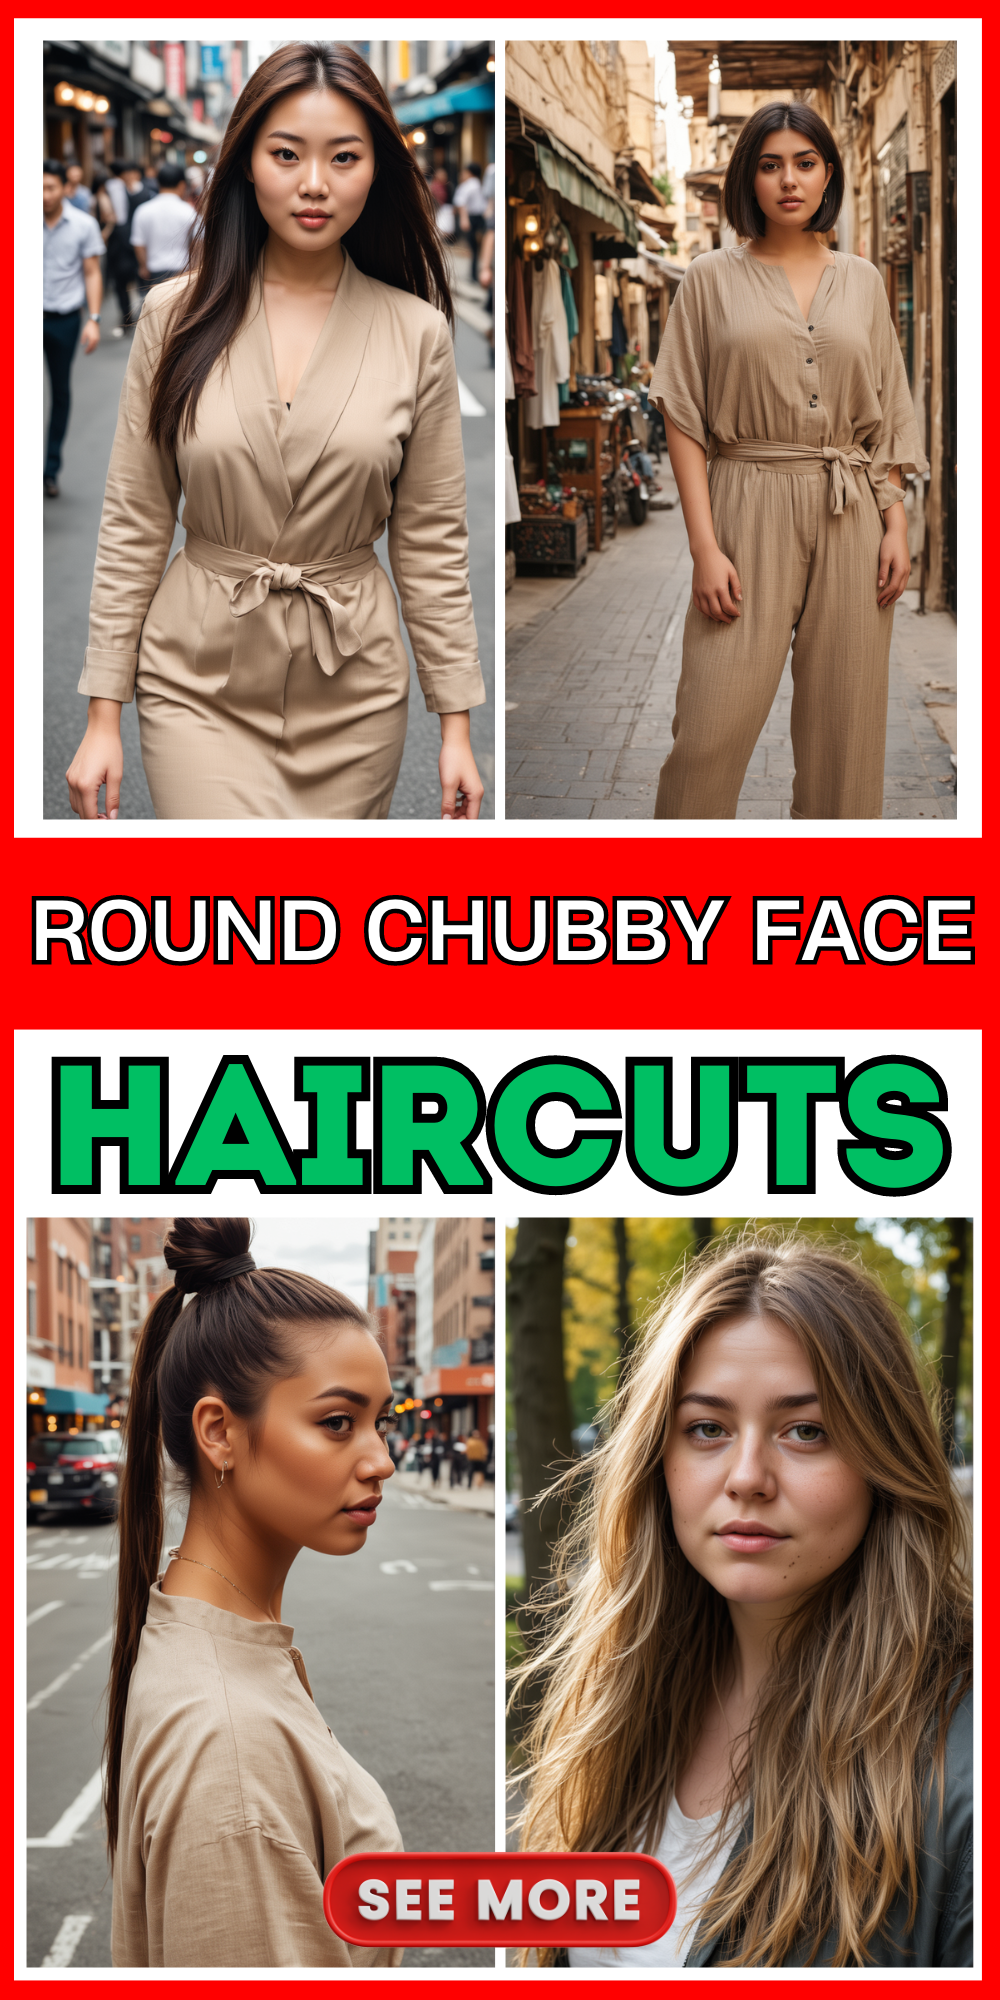 23 Best Haircuts for Round Chubby Faces: Top 23 Styles